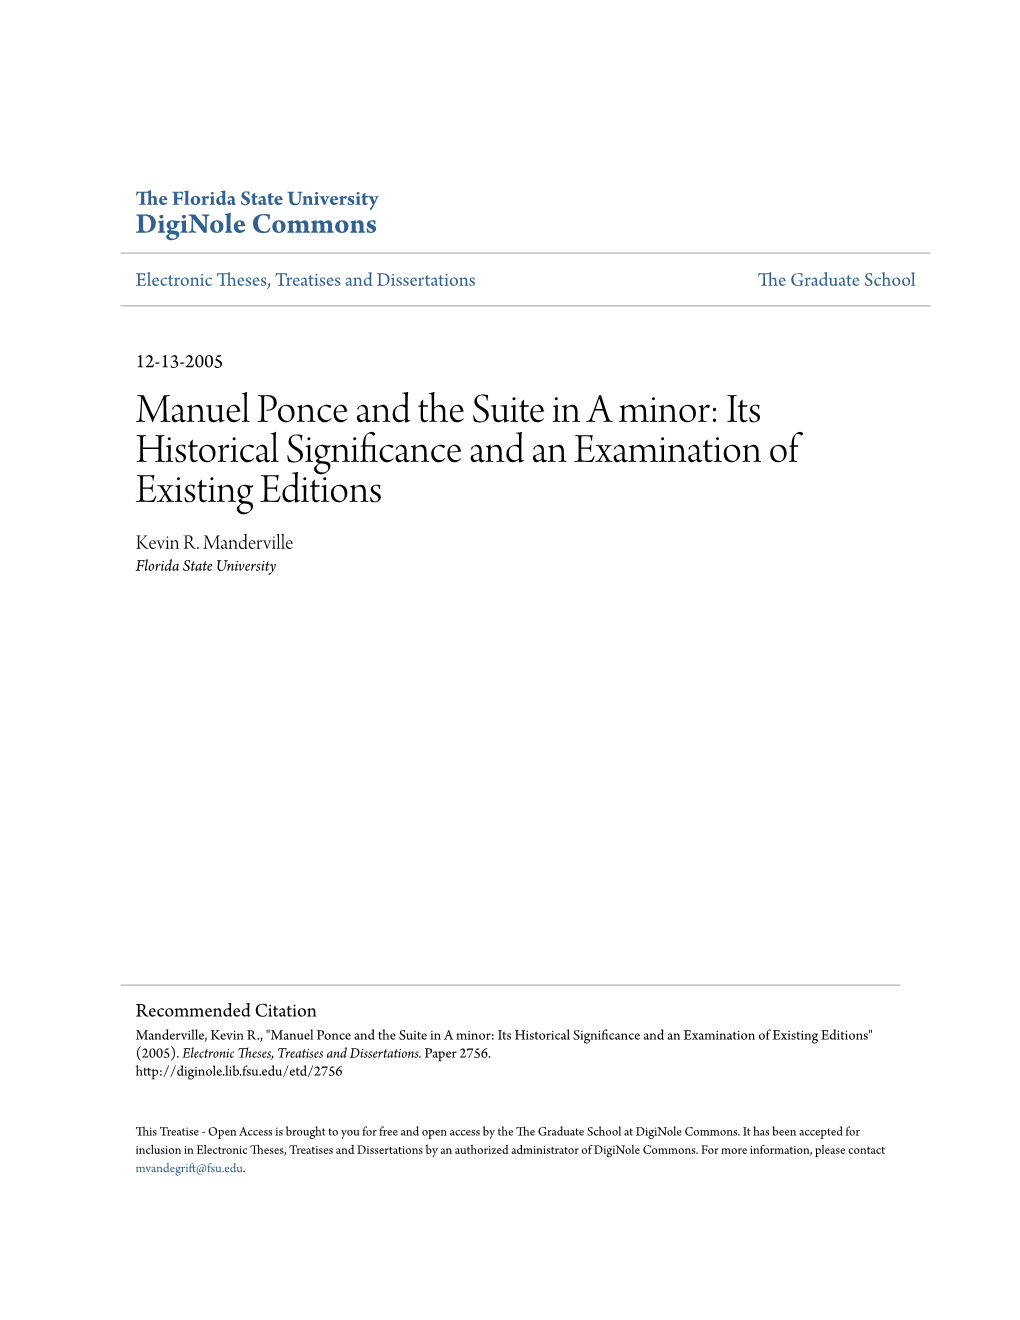 Manuel Ponce and the Suite in a Minor: Its Historical Significance and an Examination of Existing Editions Kevin R